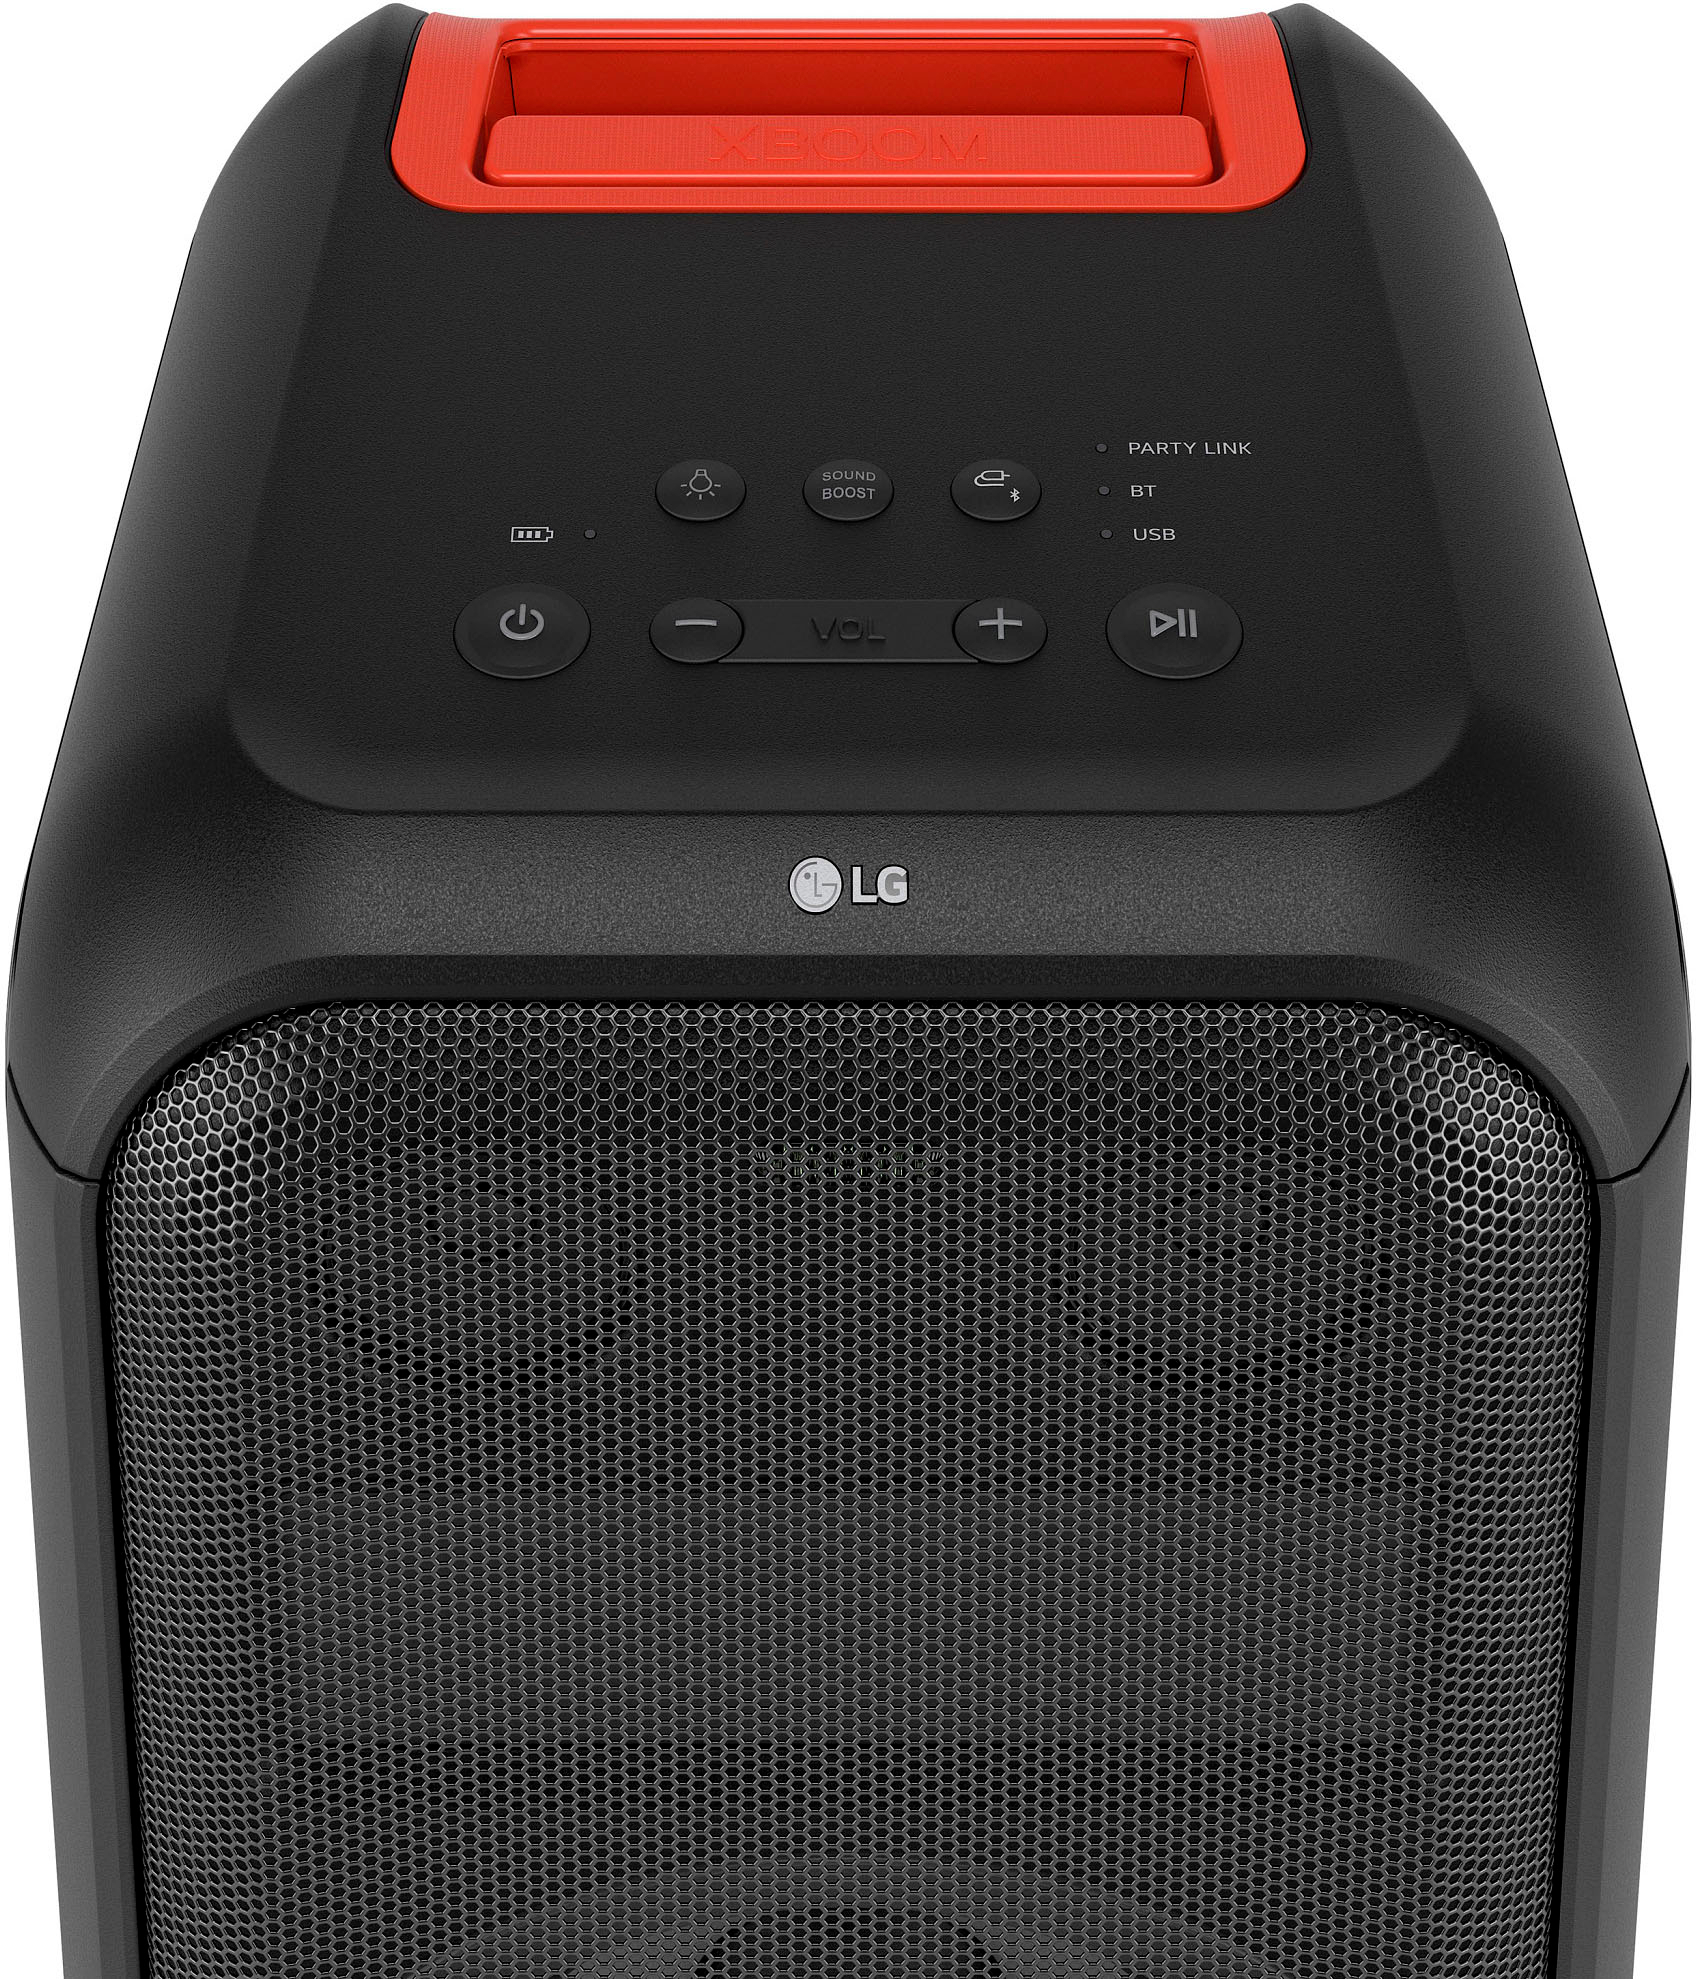 Tower Portable with Pixel Party Black - LED XBOOM Speaker XL7 Buy XL7S LG Best